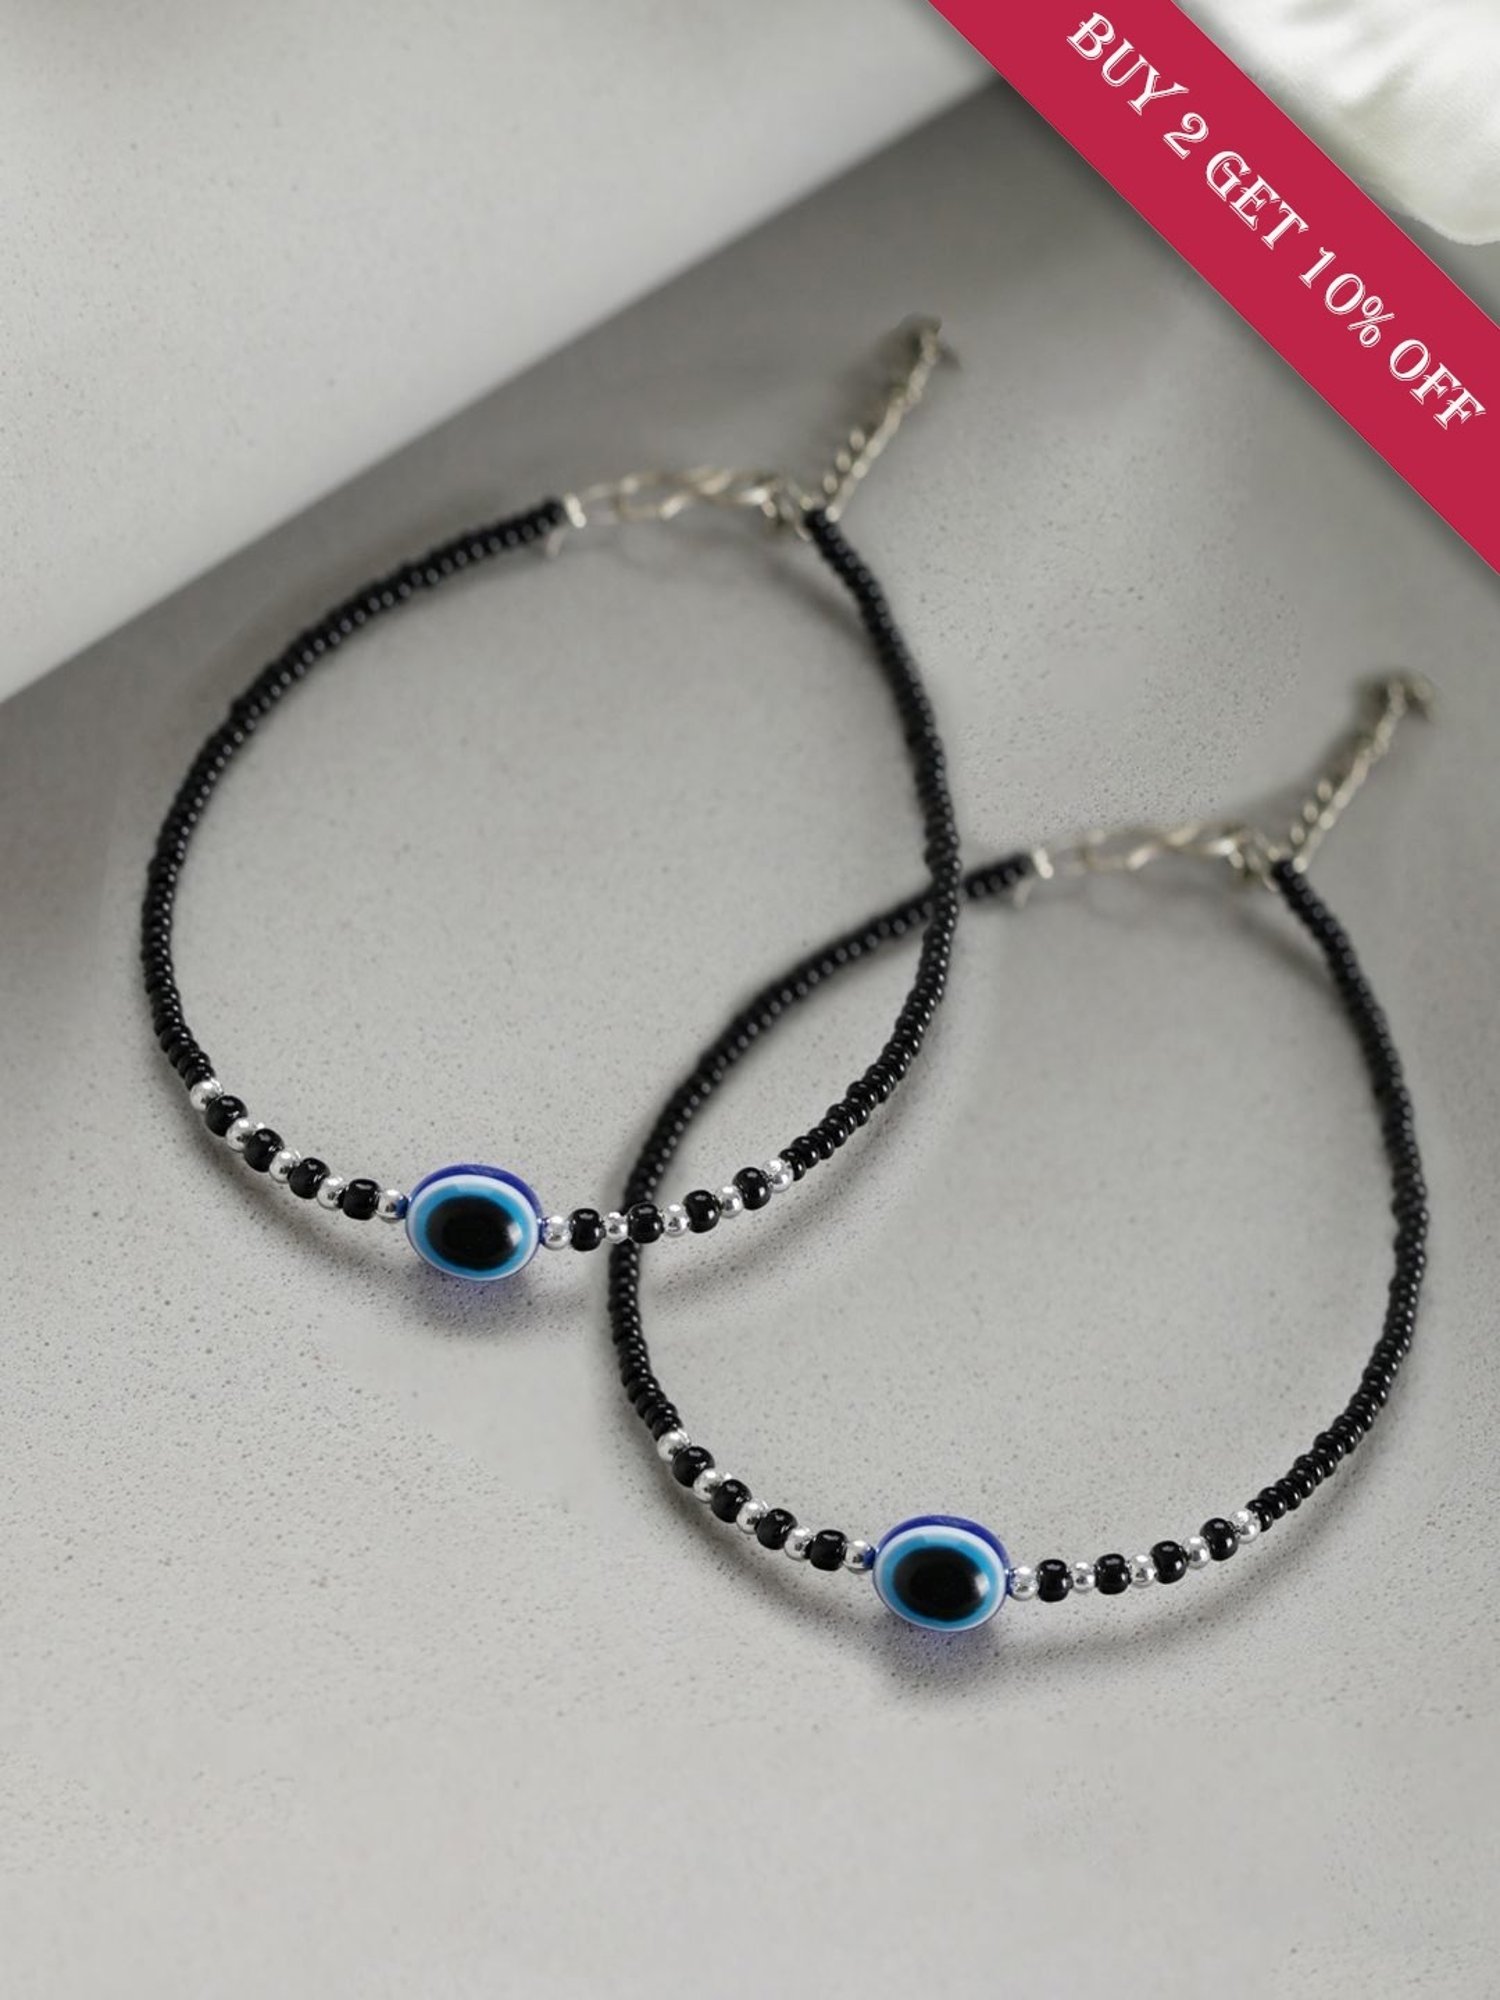 Eloish 925 Sterling Silver Evil Eye Bracelet Black Silver Online in India  Buy at Best Price from Firstcrycom  10943929